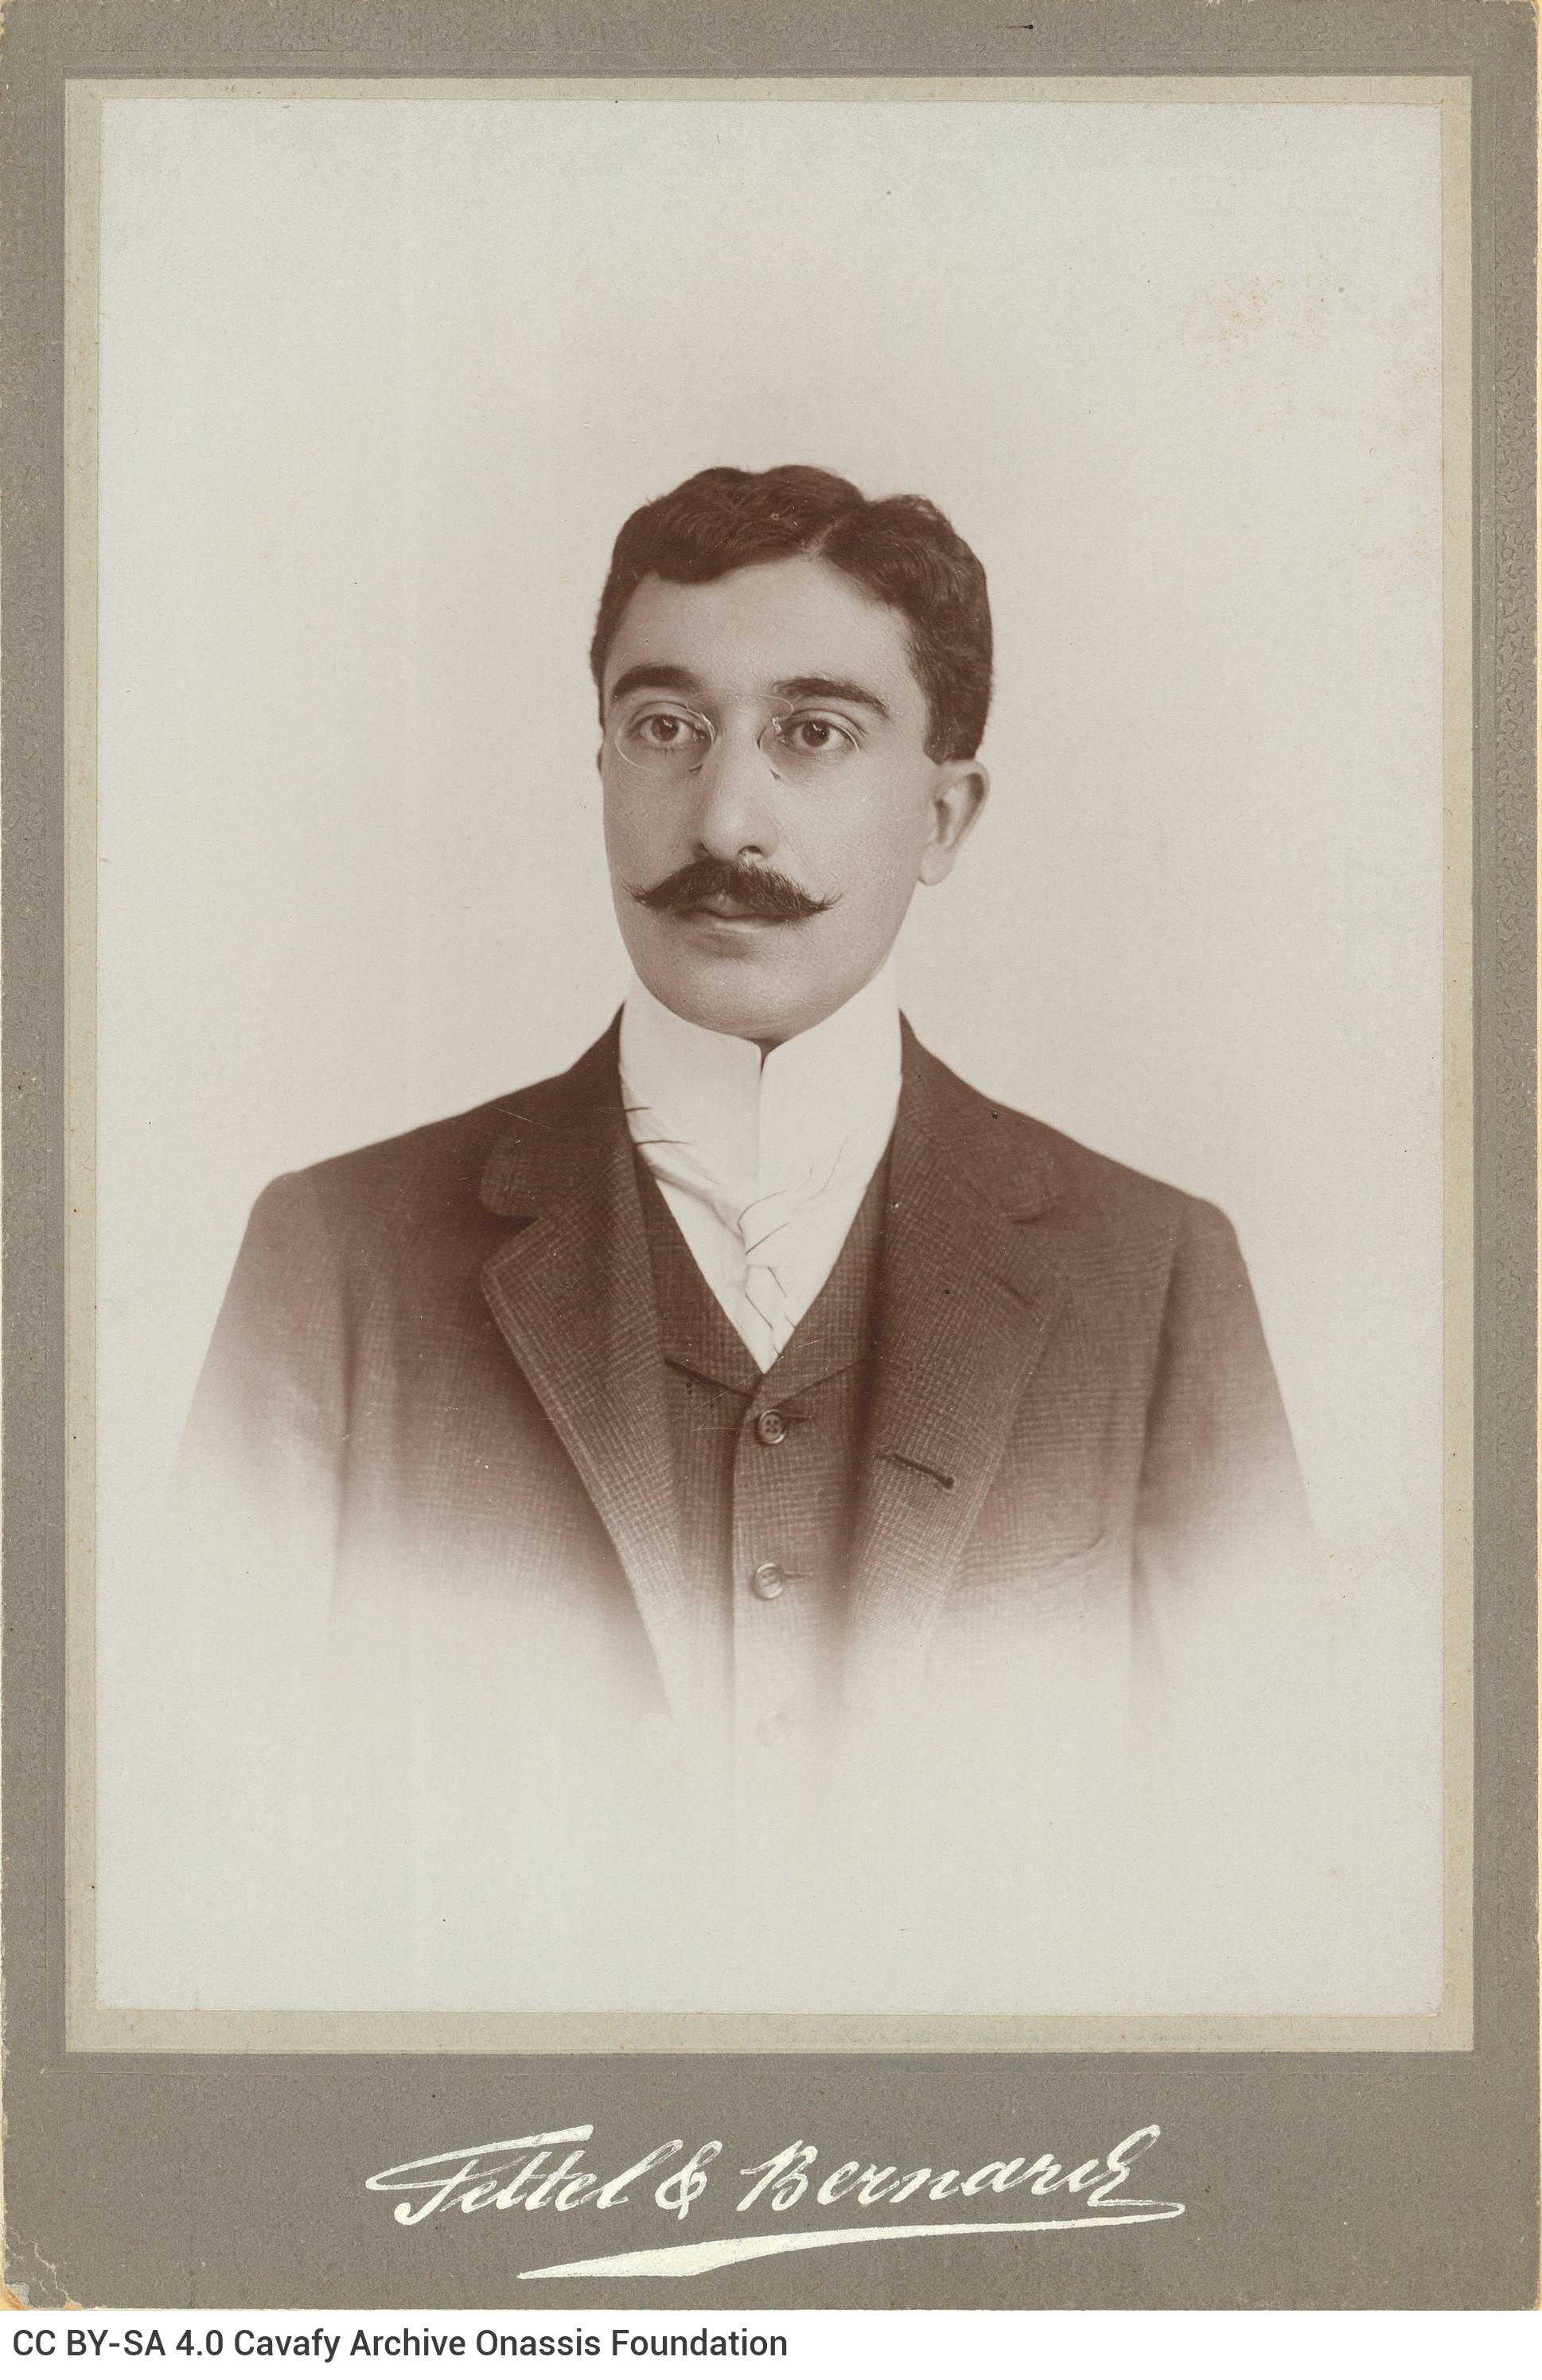 Undated photographic portrait of Cavafy by the photo shop of Fettel & Bernard in Alexandria, in five copies. The poet has a m